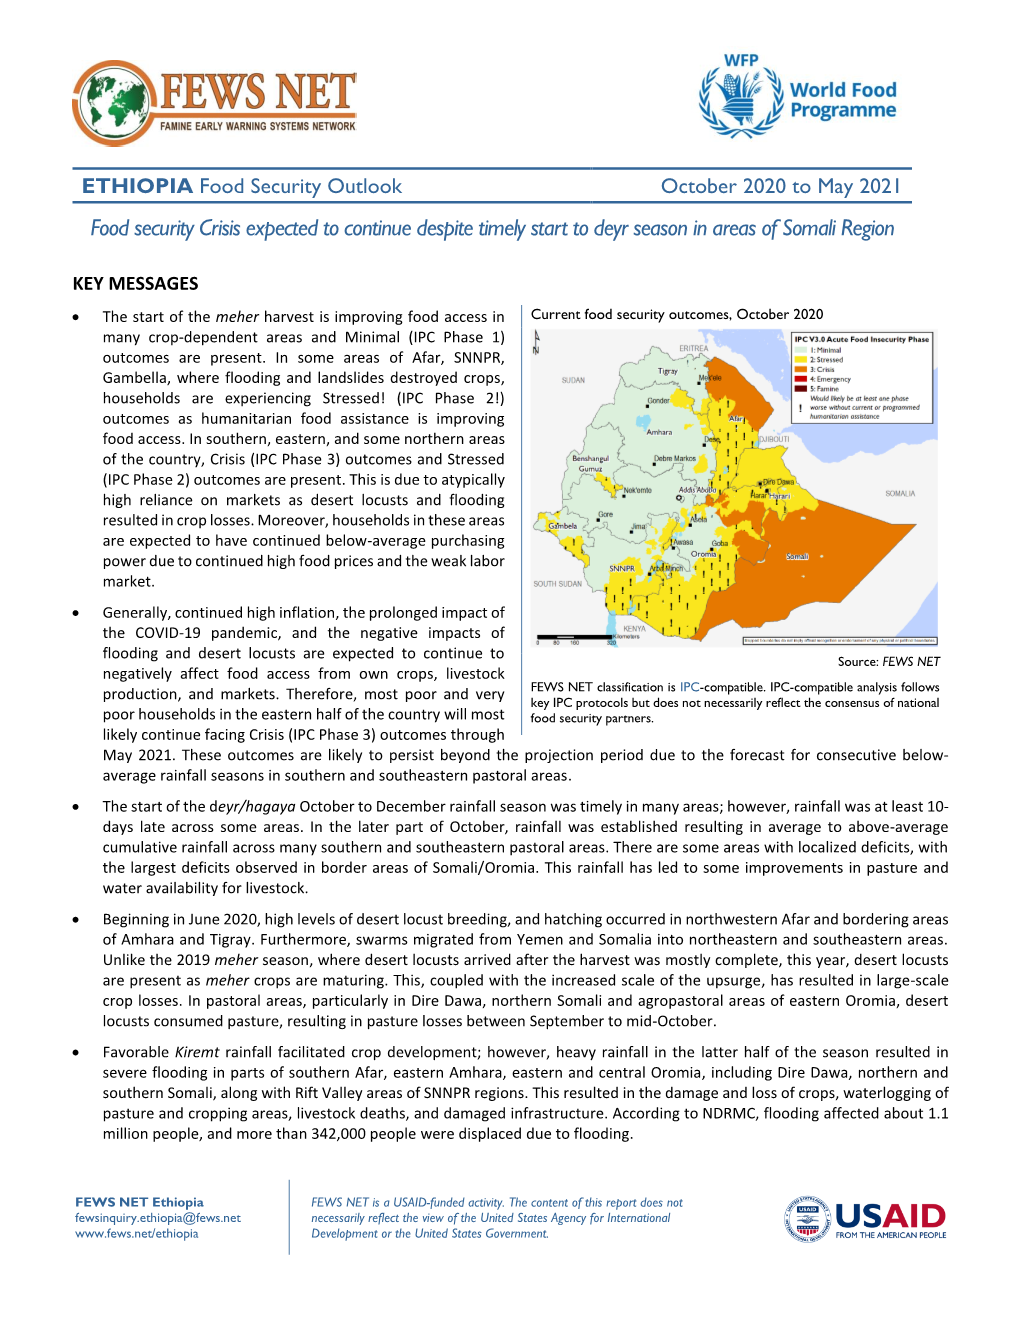 ETHIOPIA Food Security Outlook October 2020 to May 2021 Food Security Crisis Expected to Continue Despite Timely Start to Deyr Season in Areas of Somali Region